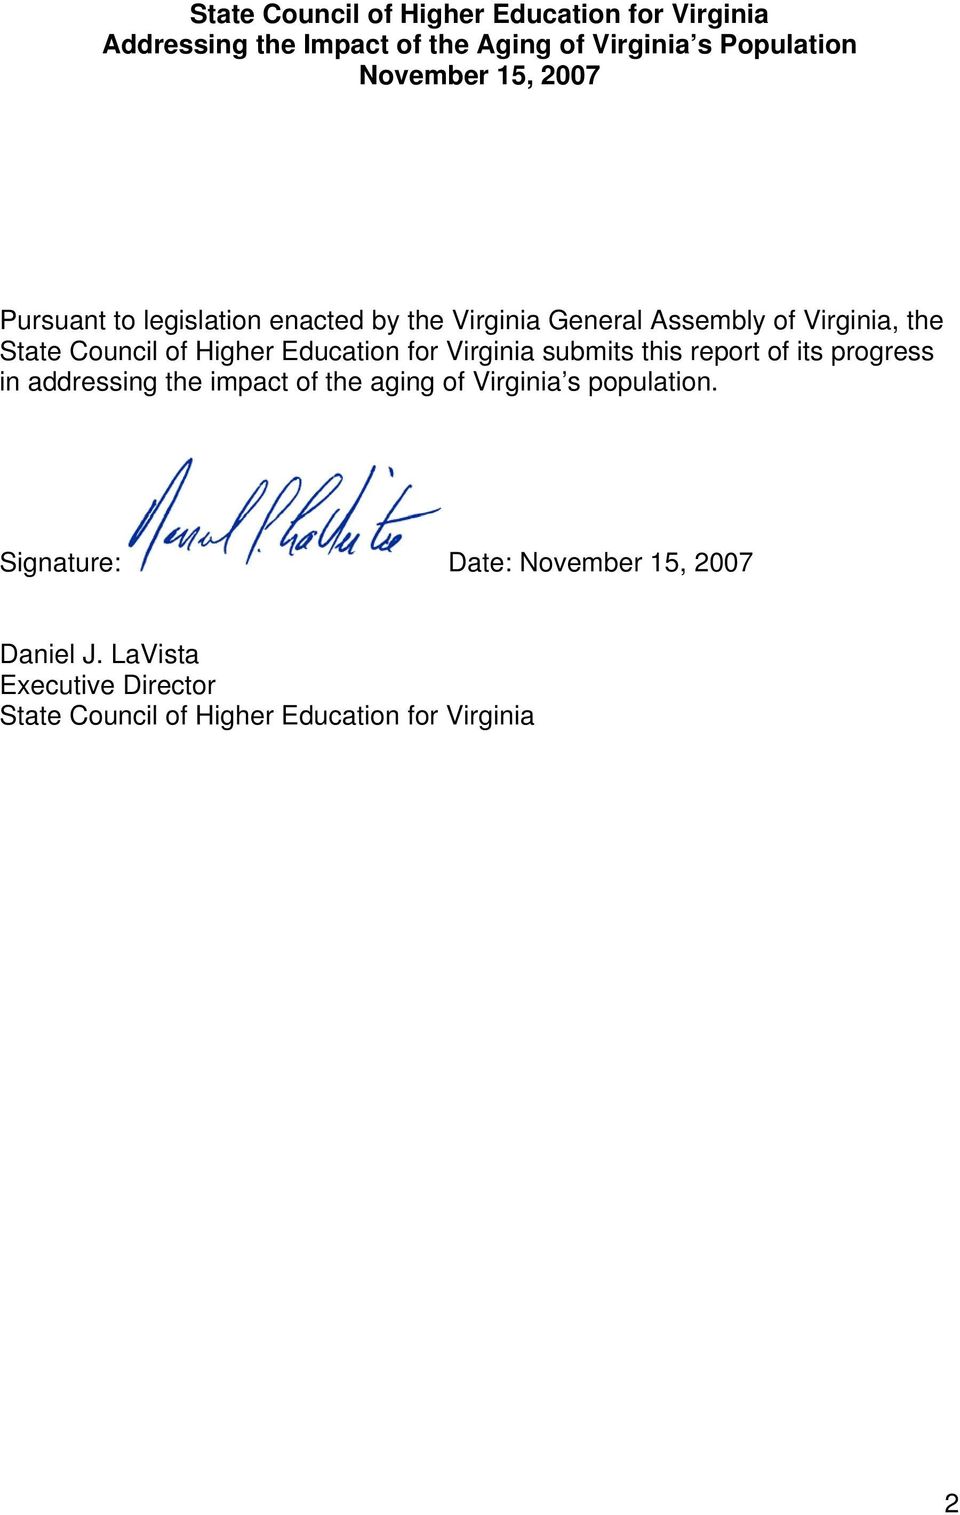 Education for Virginia submits this report of its progress in addressing the impact of the aging of Virginia